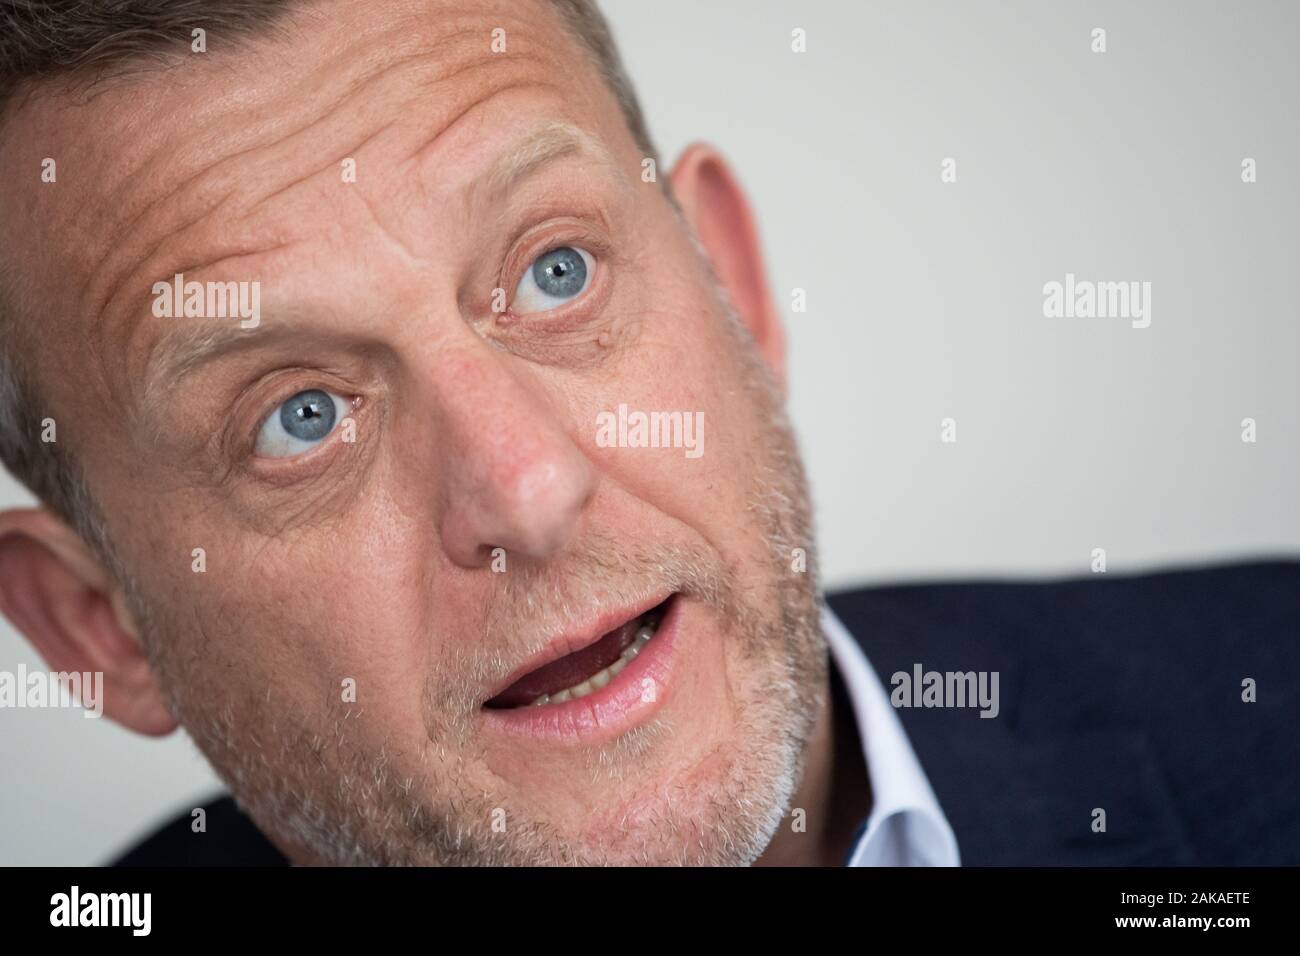 Stuttgart, Germany. 07th Jan, 2020. Roman Zitzelsberger, district manager of IG Metall Baden-Württemberg, will take part in a discussion with the Deutsche Presse-Agentur (dpa) Credit: Tom Weller/dpa/Alamy Live News Stock Photo